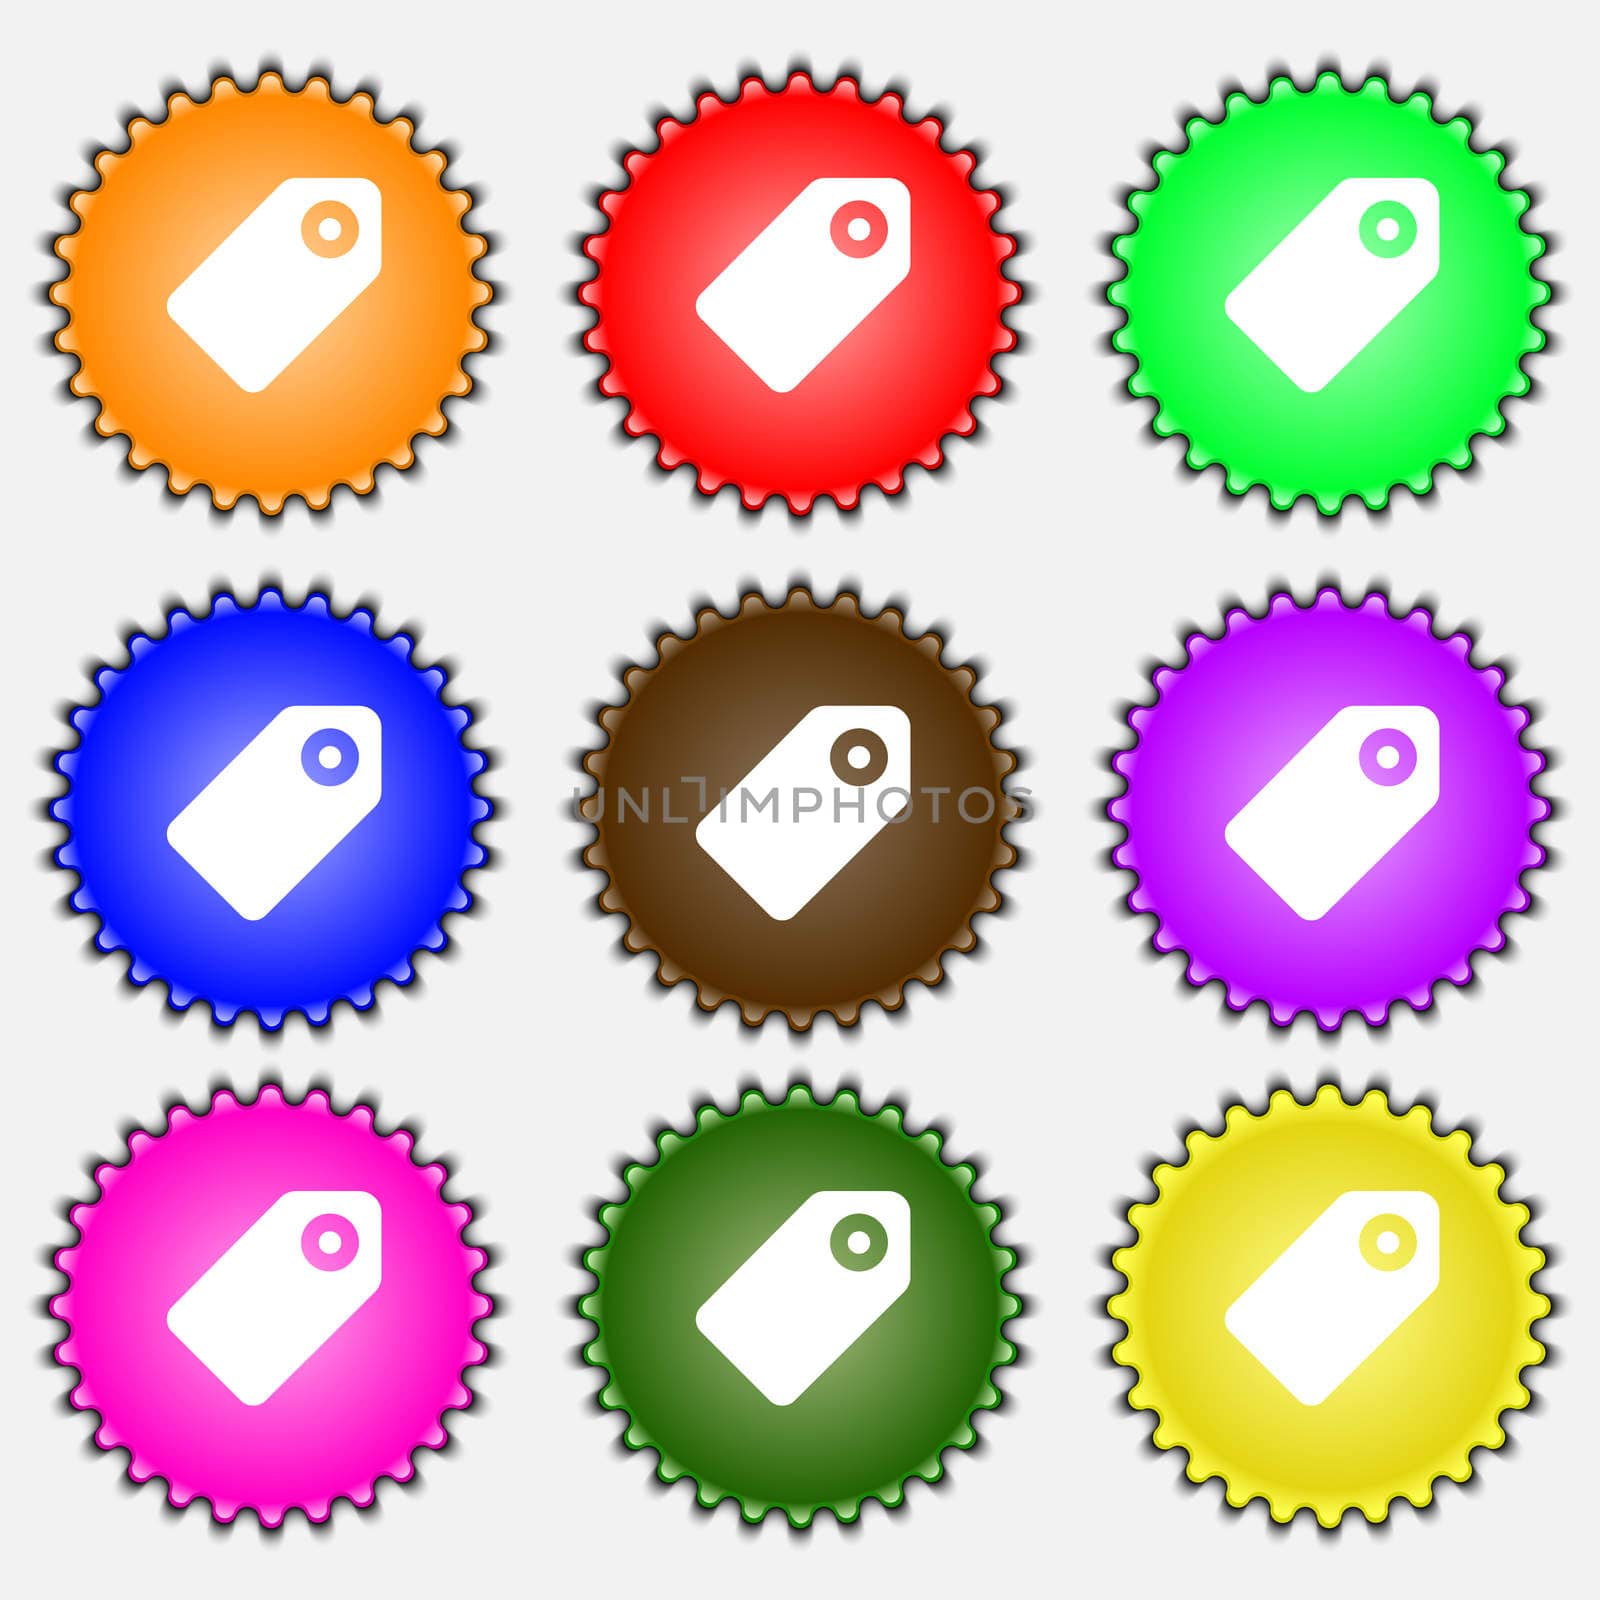 Special offer label icon sign. A set of nine different colored labels. illustration